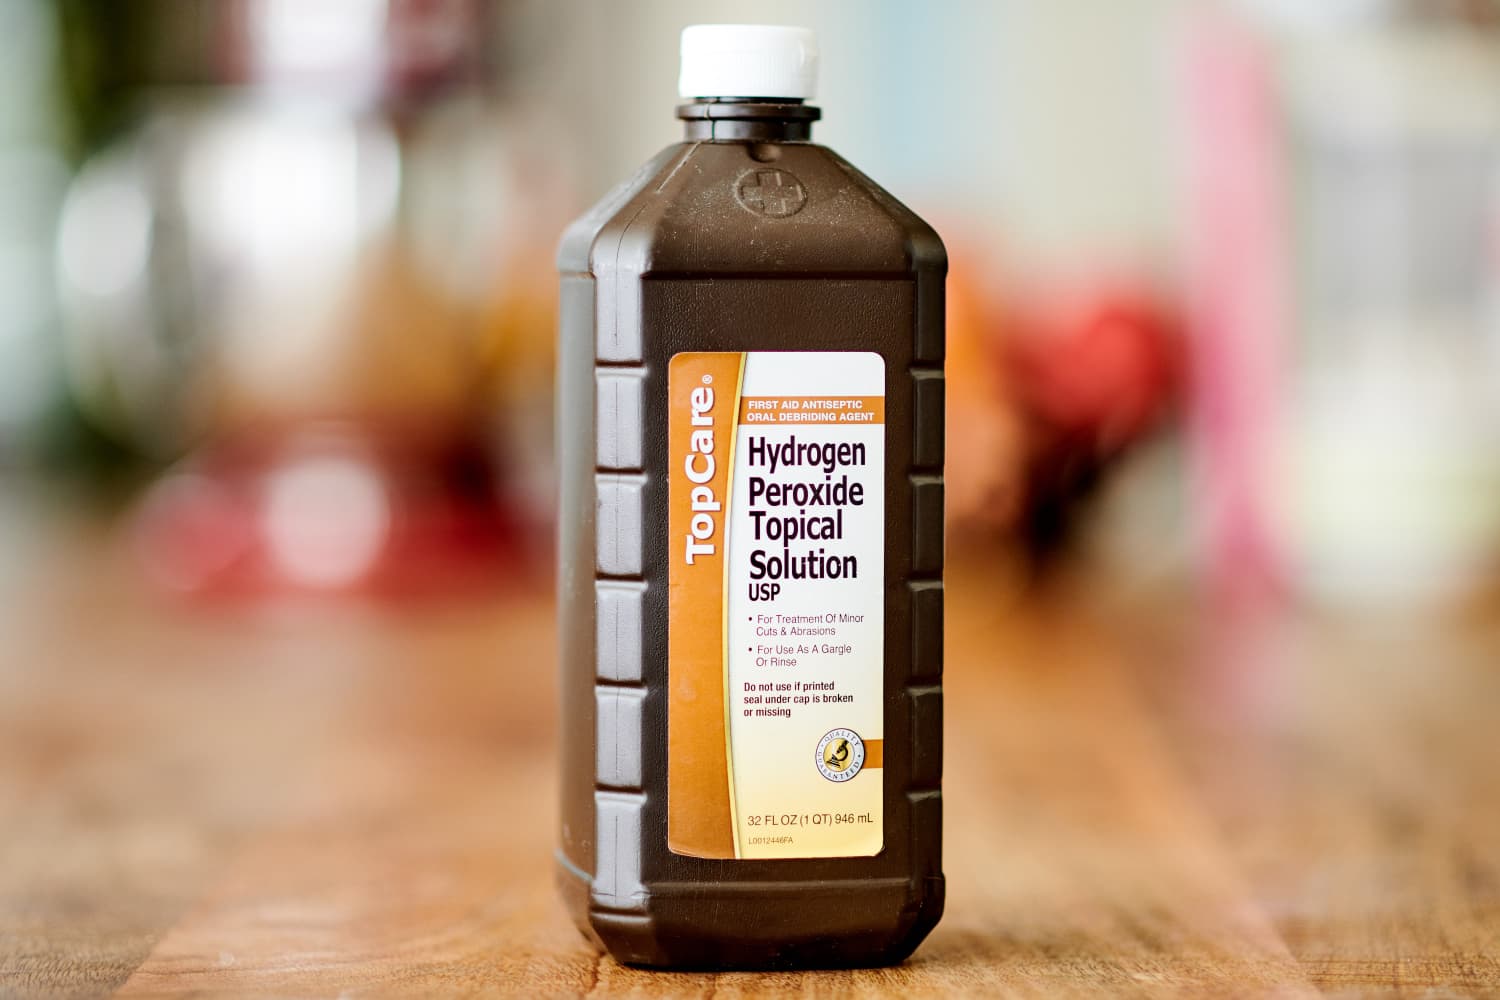 The First Thing You Should Do with a New Bottle of Hydrogen Peroxide